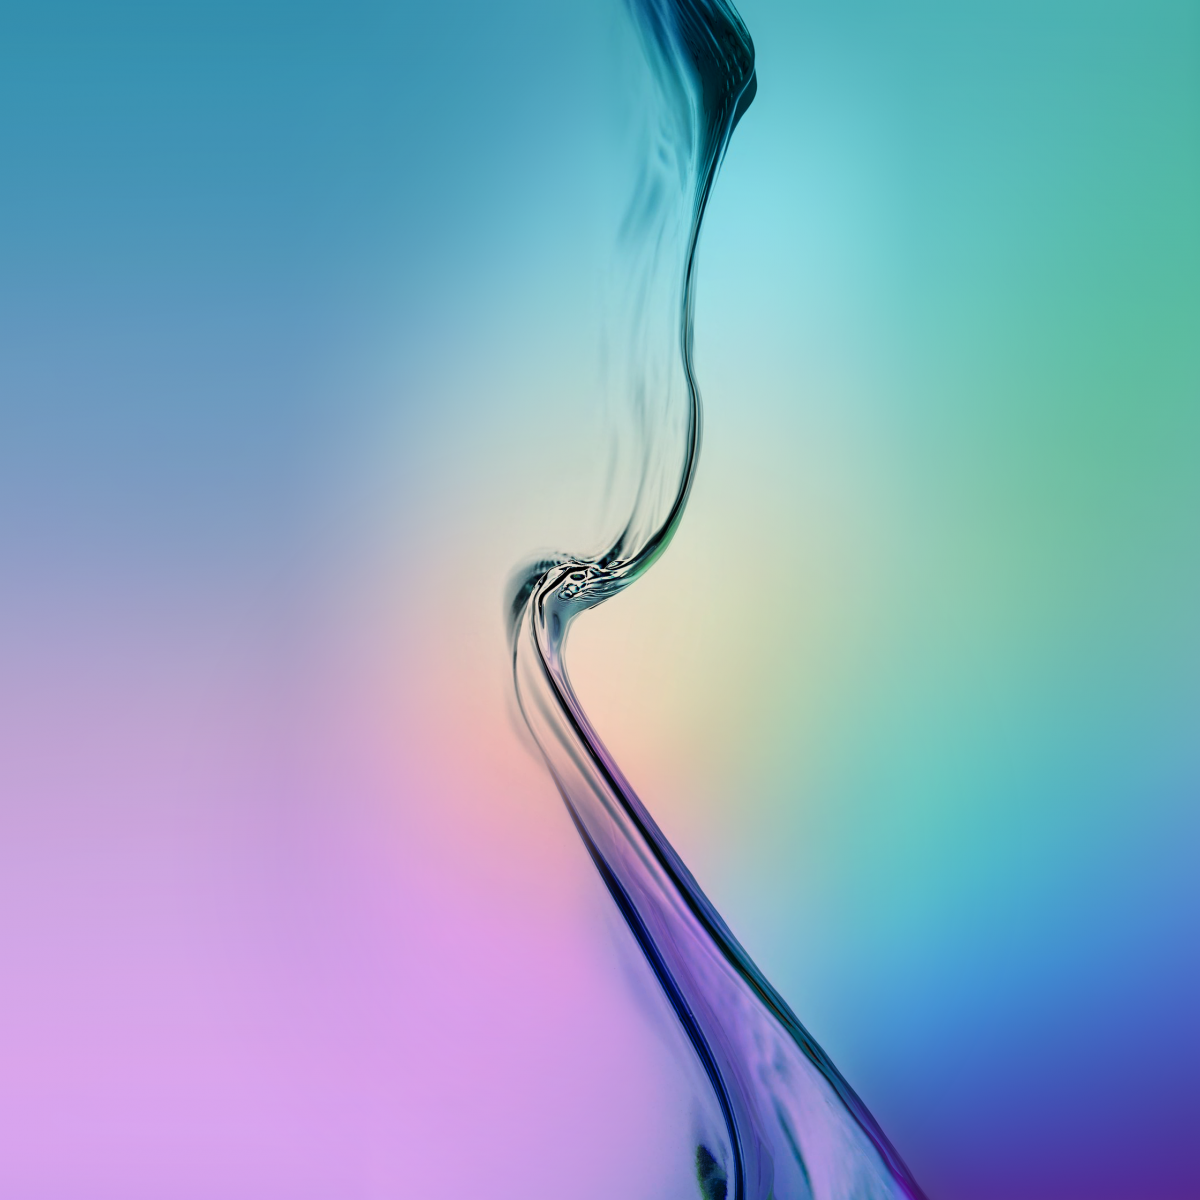 wallpapers for the Samsung Galaxy S6 and Galaxy S6 Edge